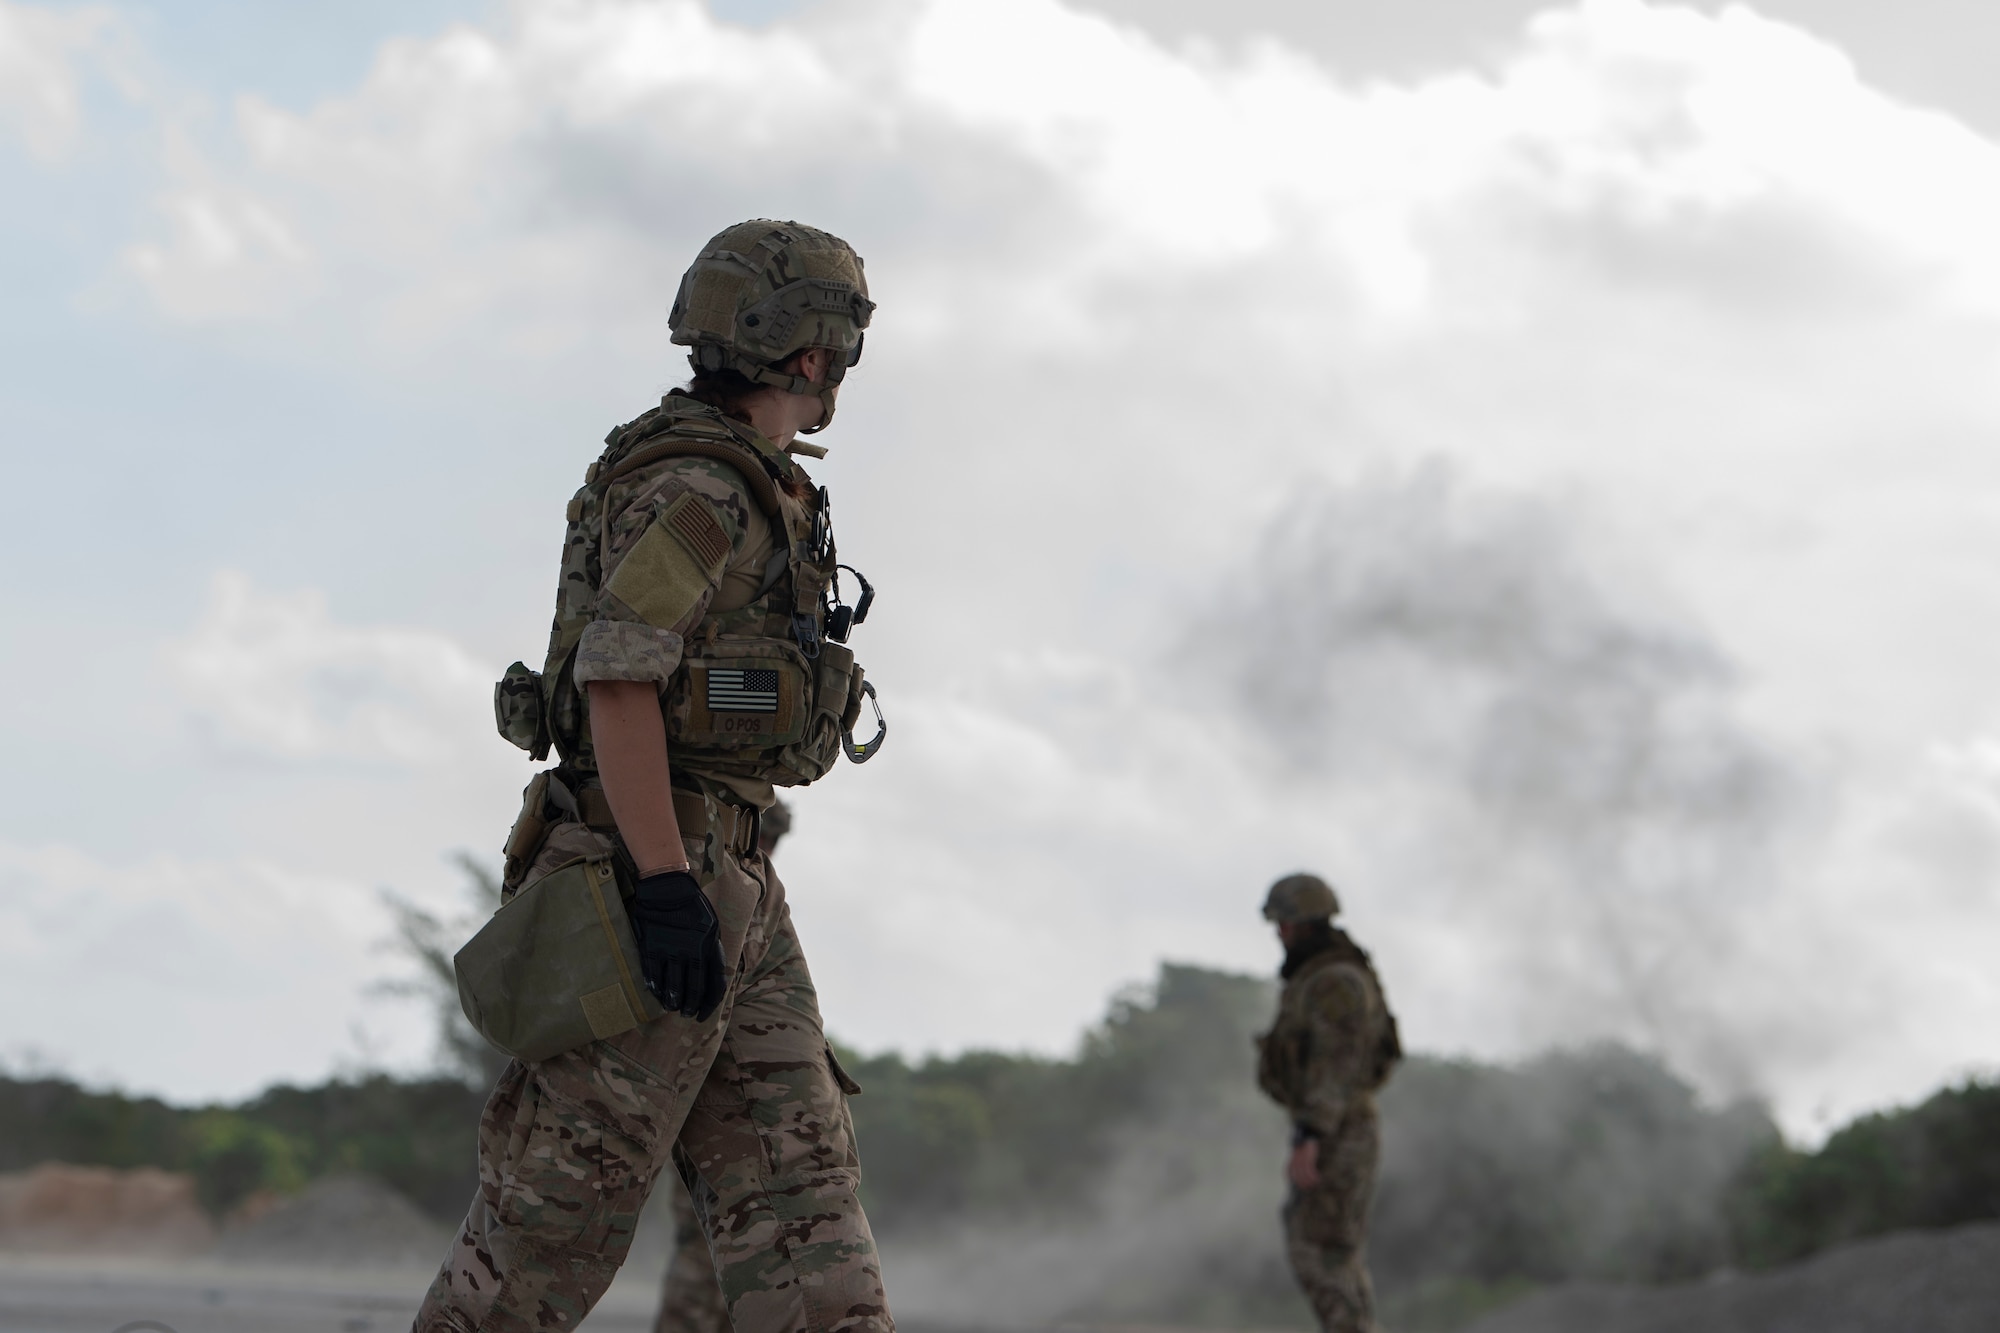 An Explosive Ordnance Disposal technician with the 36th Civil Engineer Squadron place explosives on the runway as part of a Rapid Airfield Damage Repair (RADR) Exercise at Andersen Air Force Base, Guam, Feb. 12, 2020.